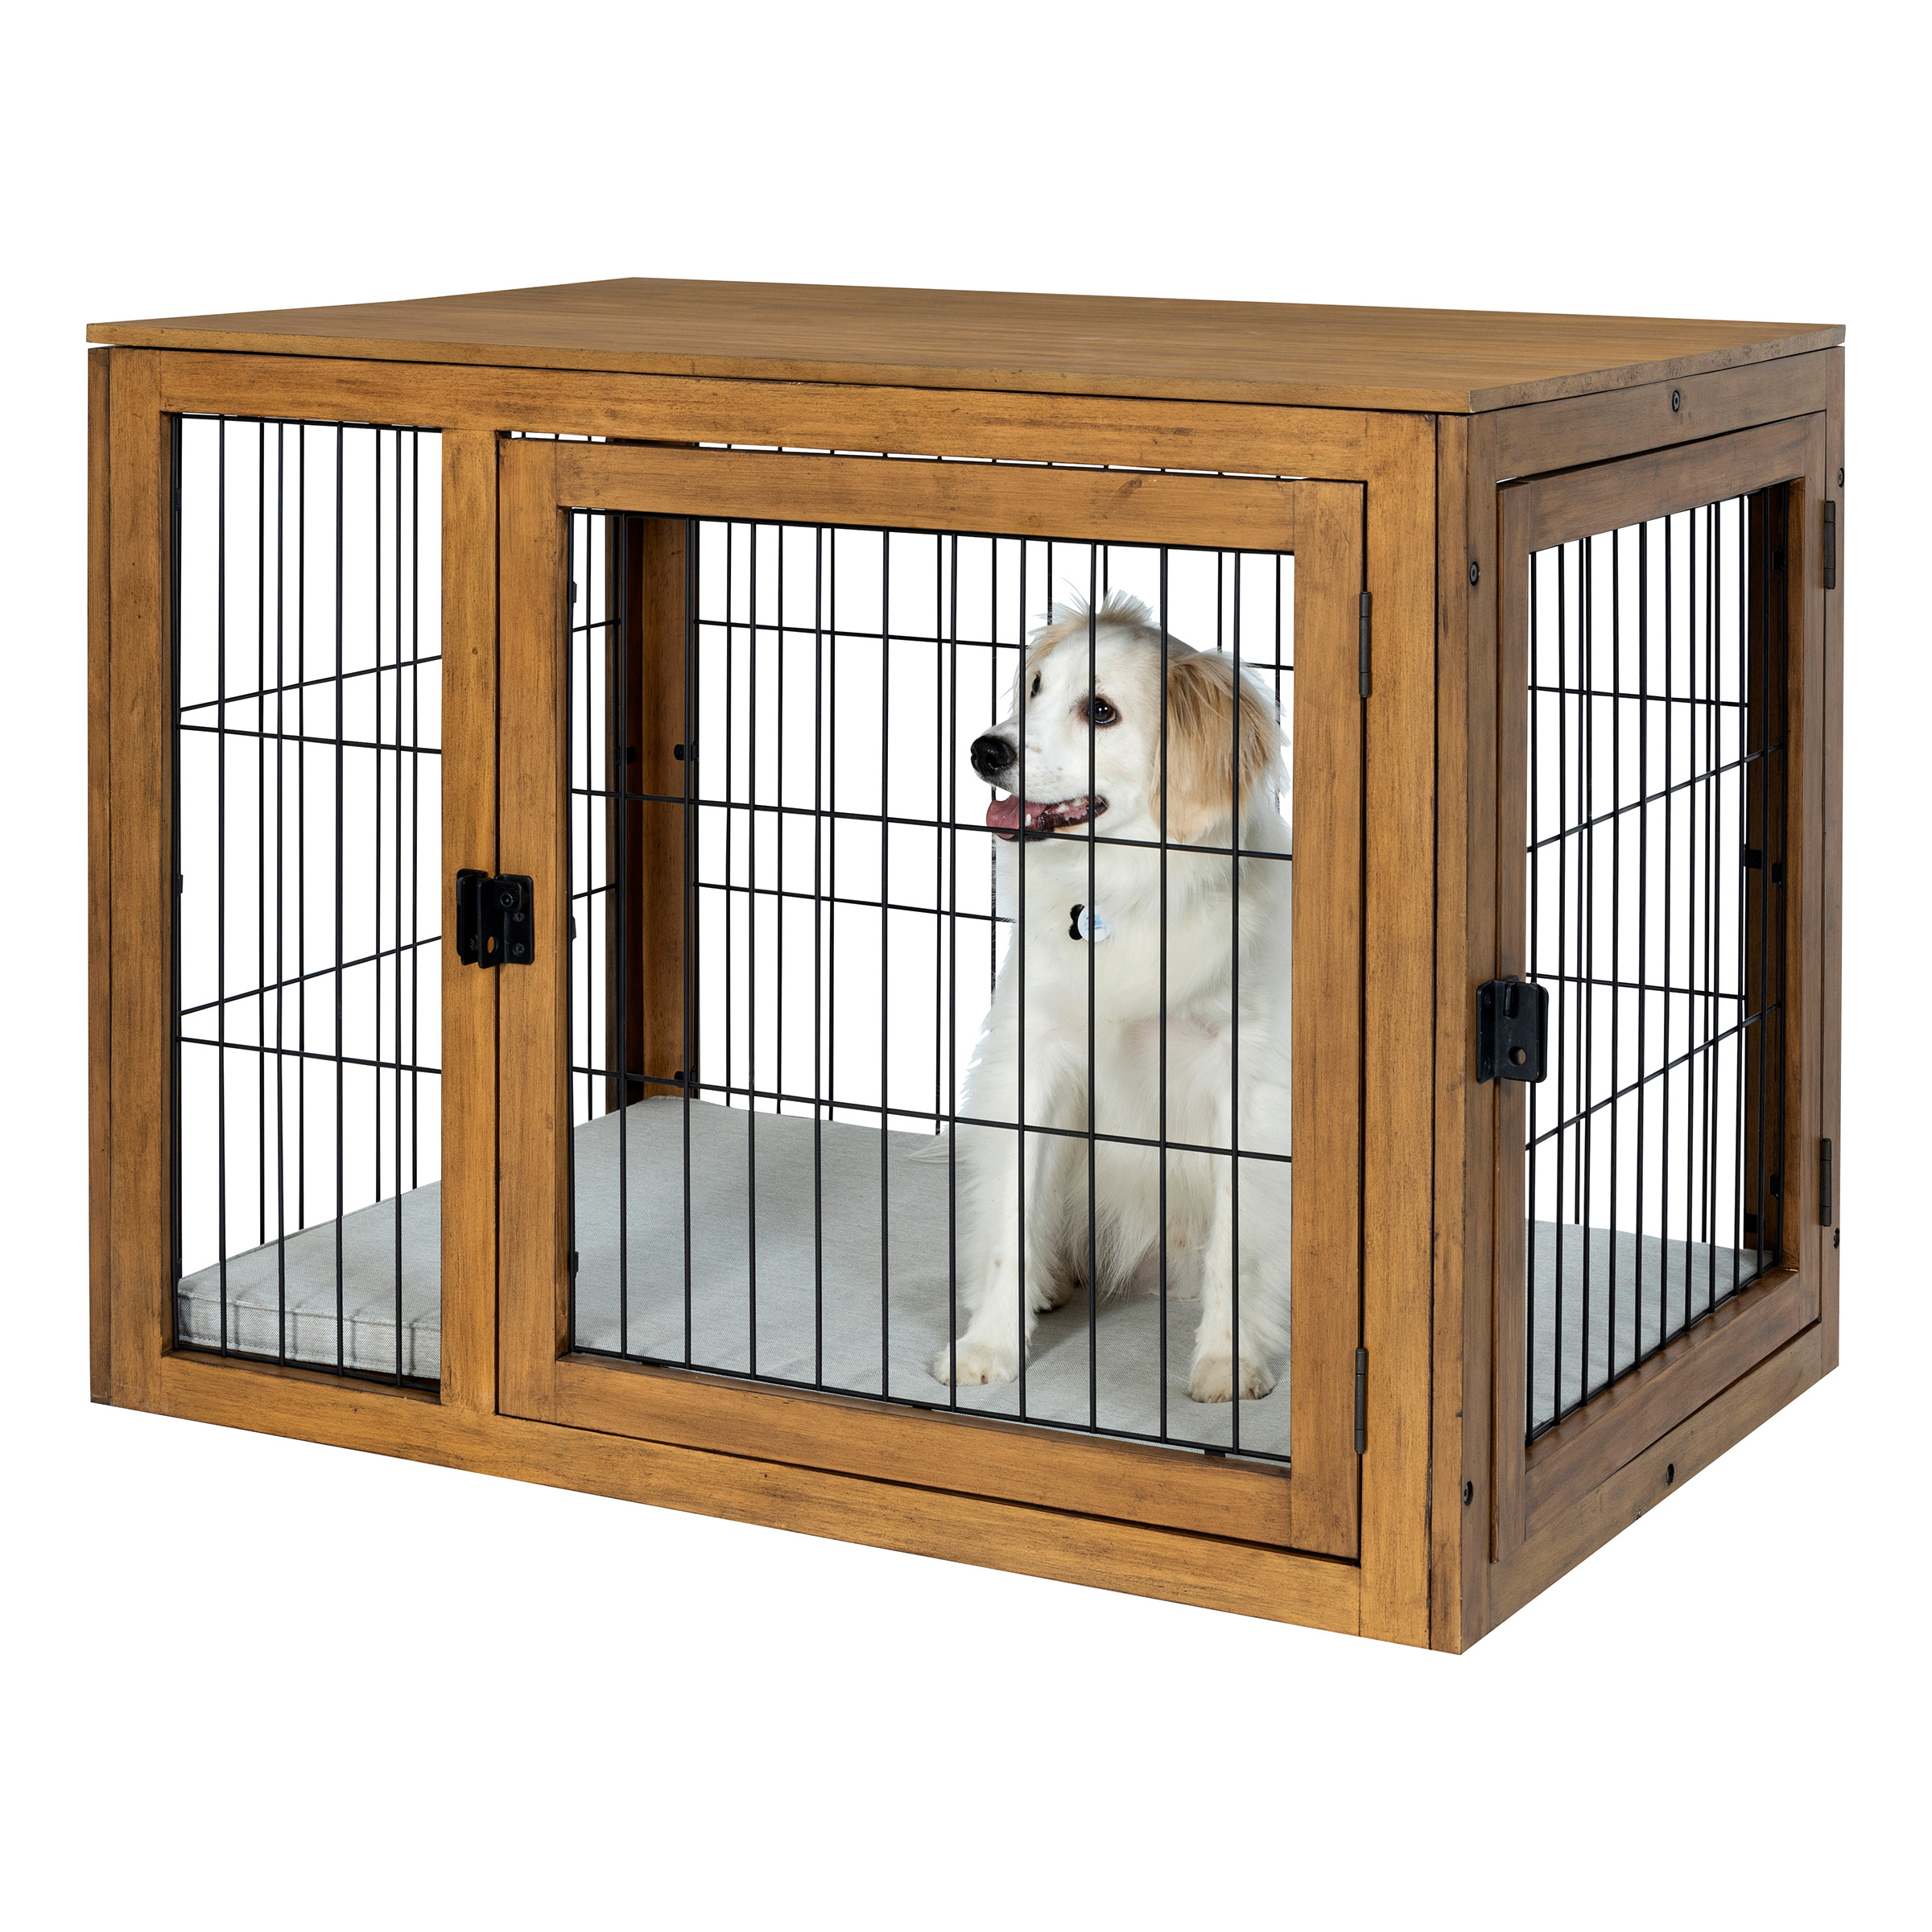 Furniture-Style Dog Crate - Acacia Wood Kennel For Large Dogs With Double Doors And Cushion - Dog Kennel Furniture By PETMAKER (Natural)